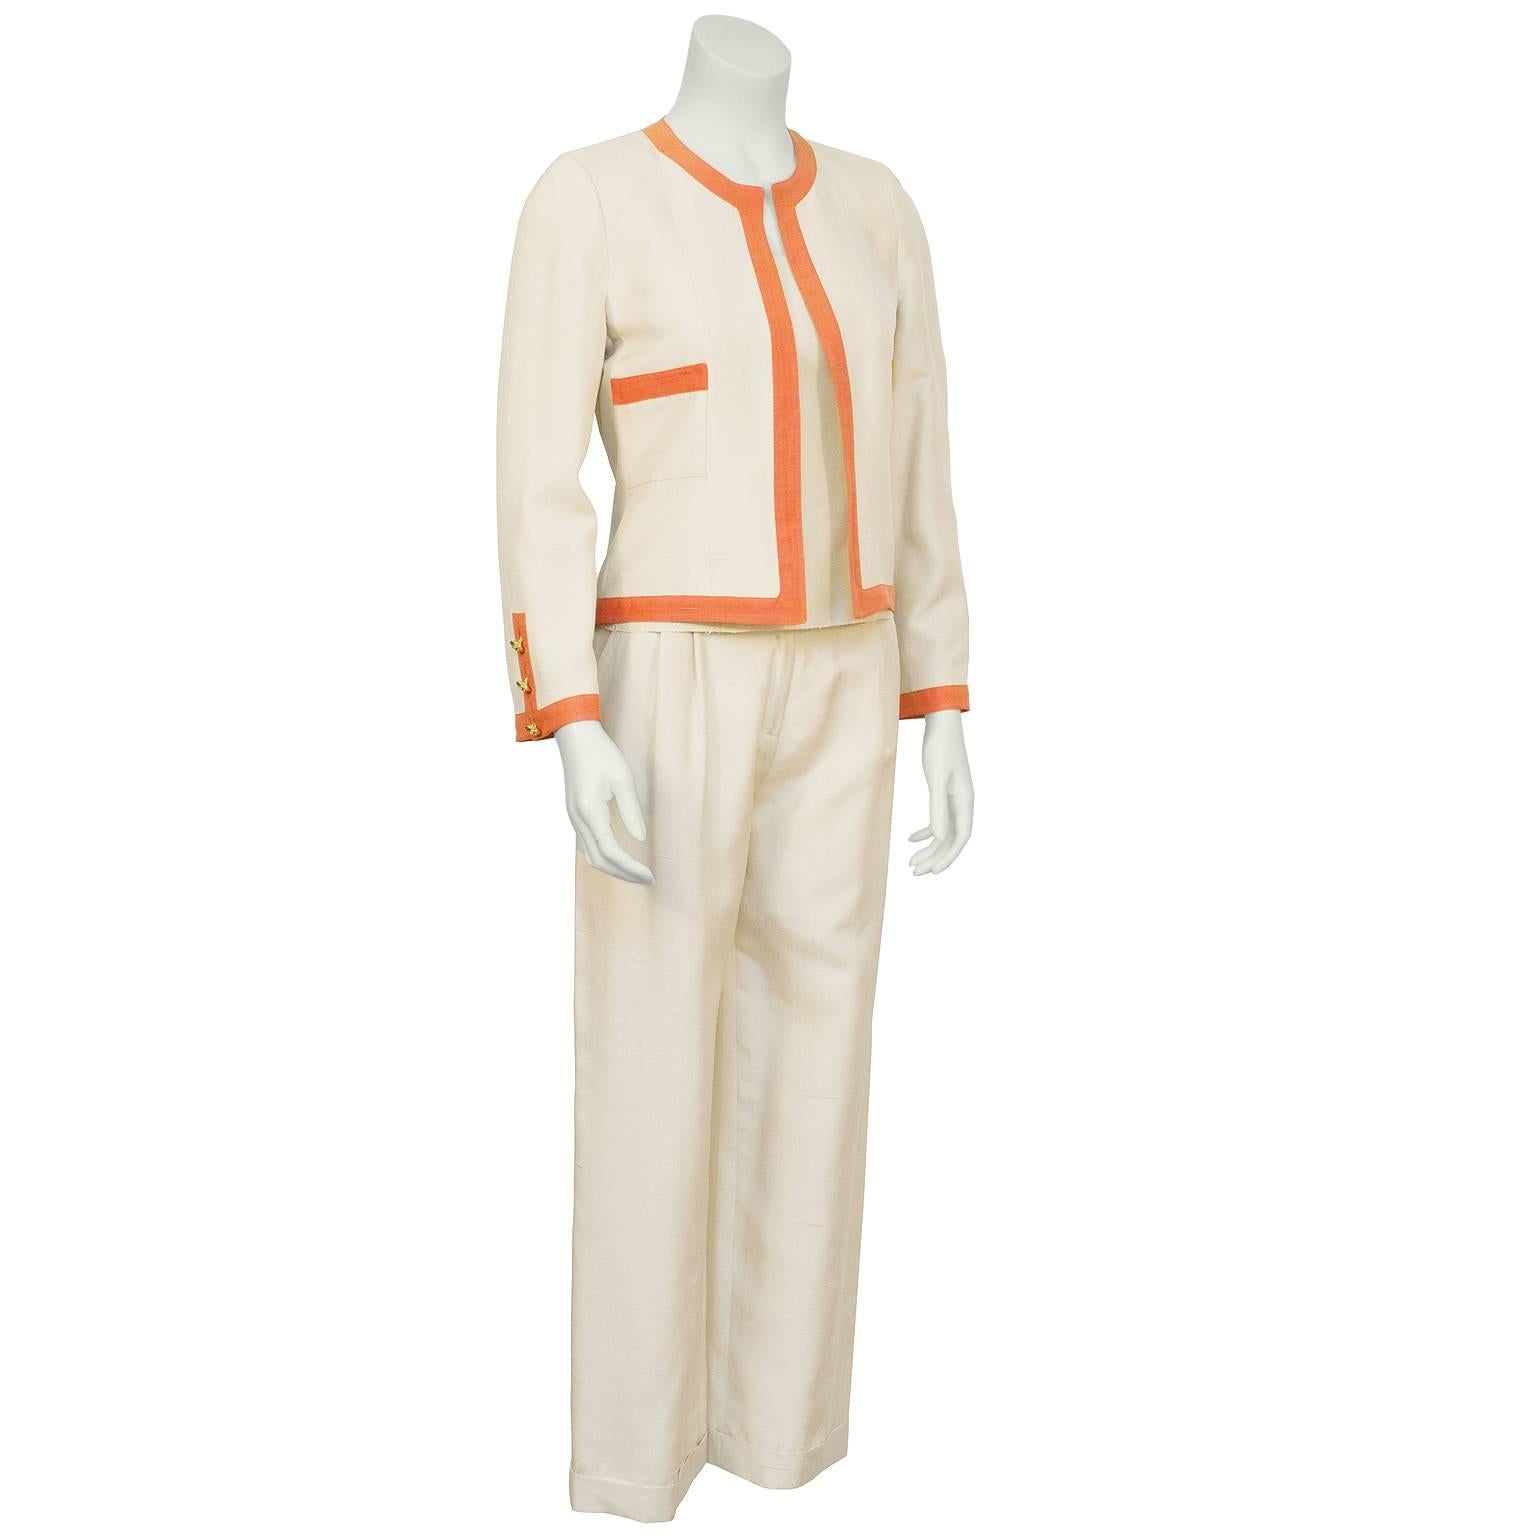 Chanel 1970's cream and orange raw silk 3-piece pantsuit from the collection of Lynn Manulis daughter of the legendary Martha's of Palm Beach. The jacket is in the classic Chanel style with two front pockets, trimmed in orange and features gold